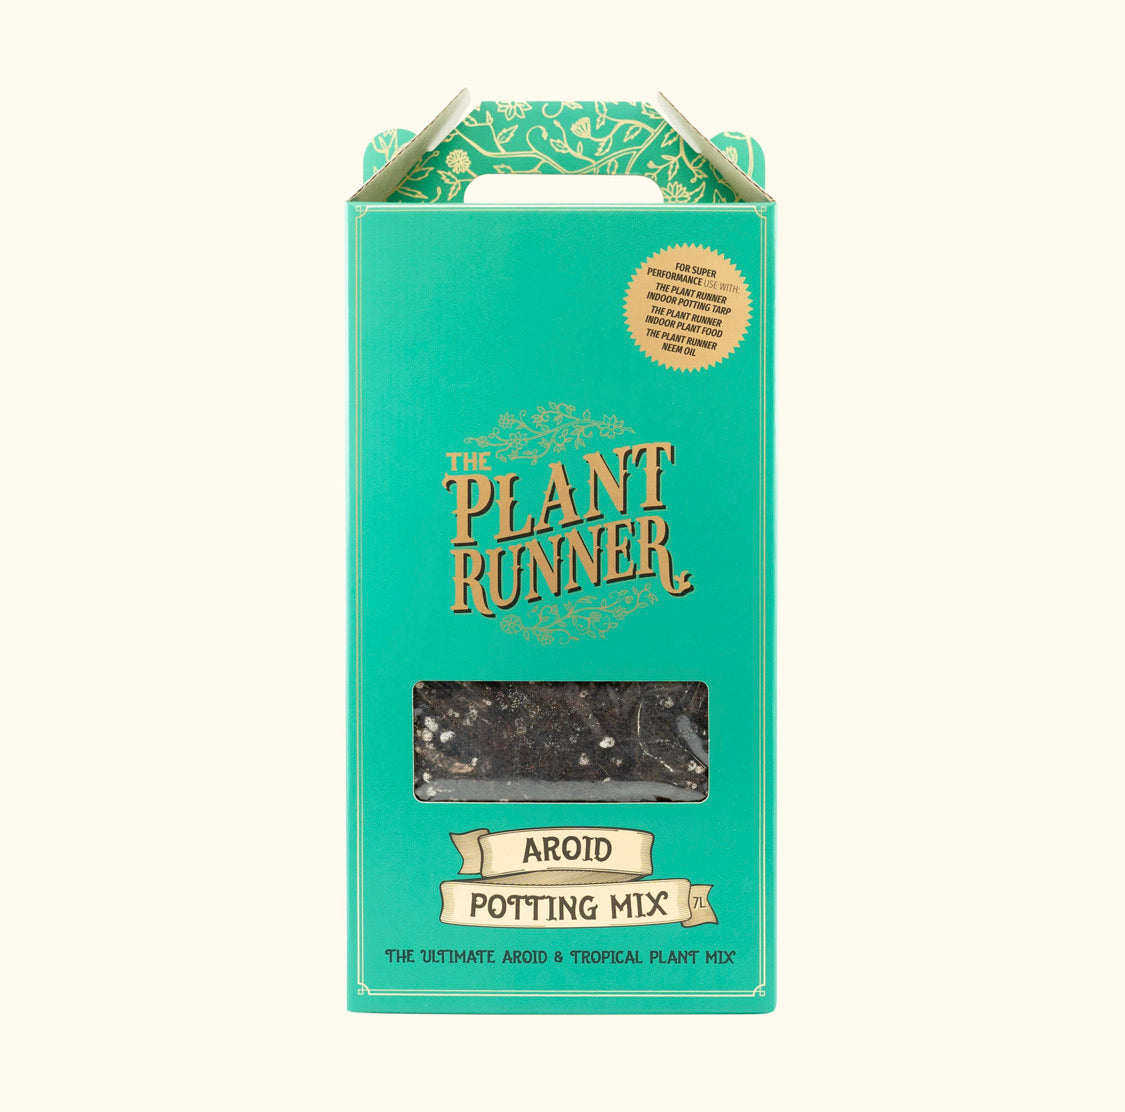 Aroid Potting Mix by the Plant Runner